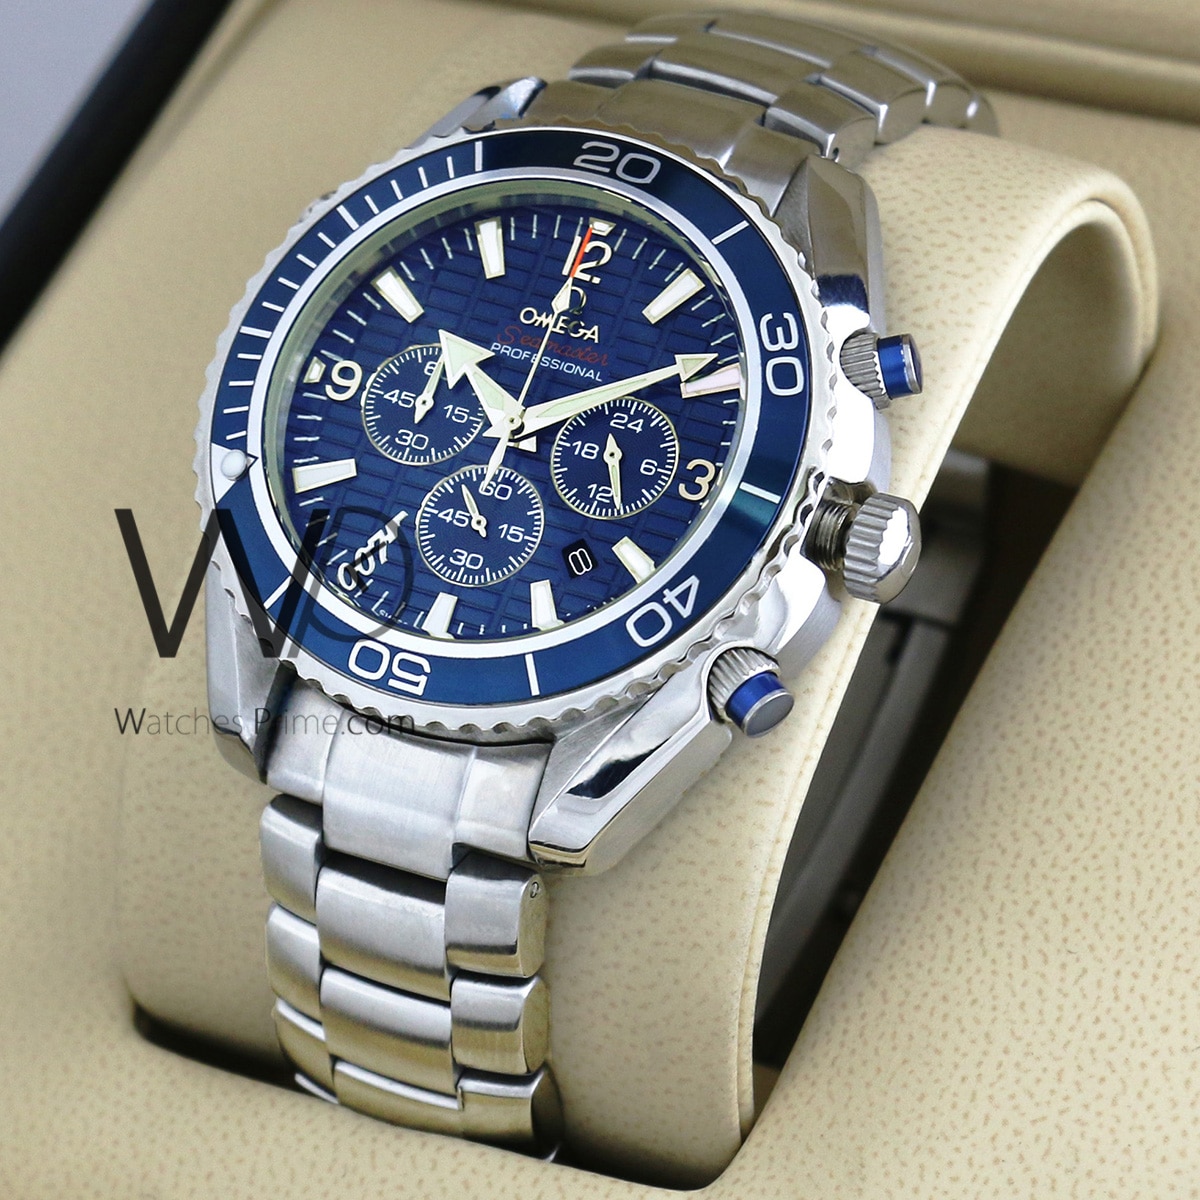 OMEGA 007 CHRONOGRAPH WATCH BLUE WITH STAINLESS STEEL ...